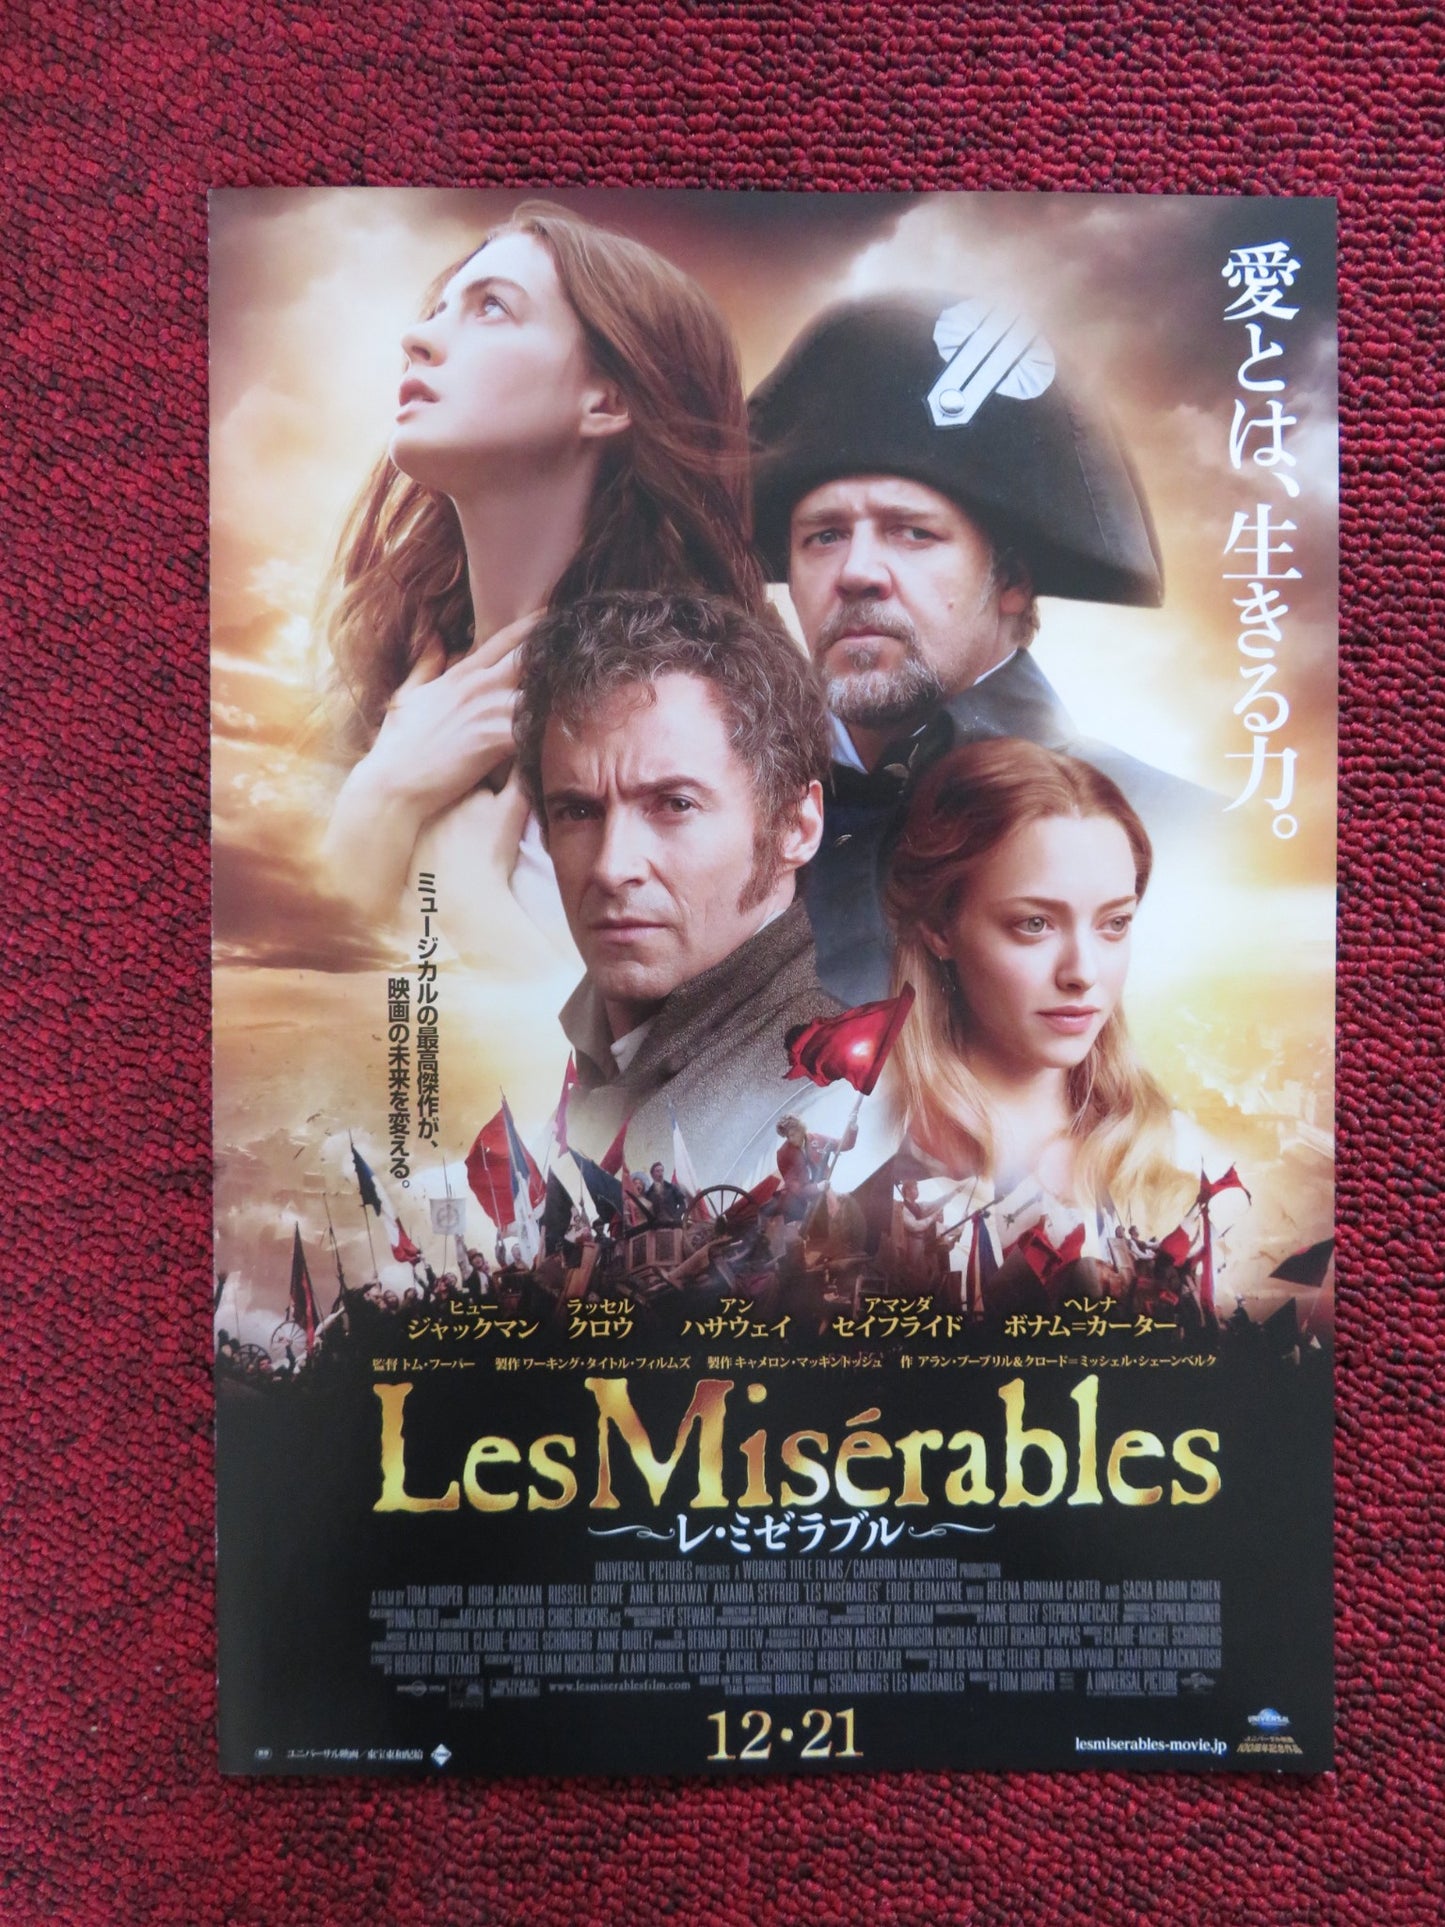 russell crowe les miserables poster